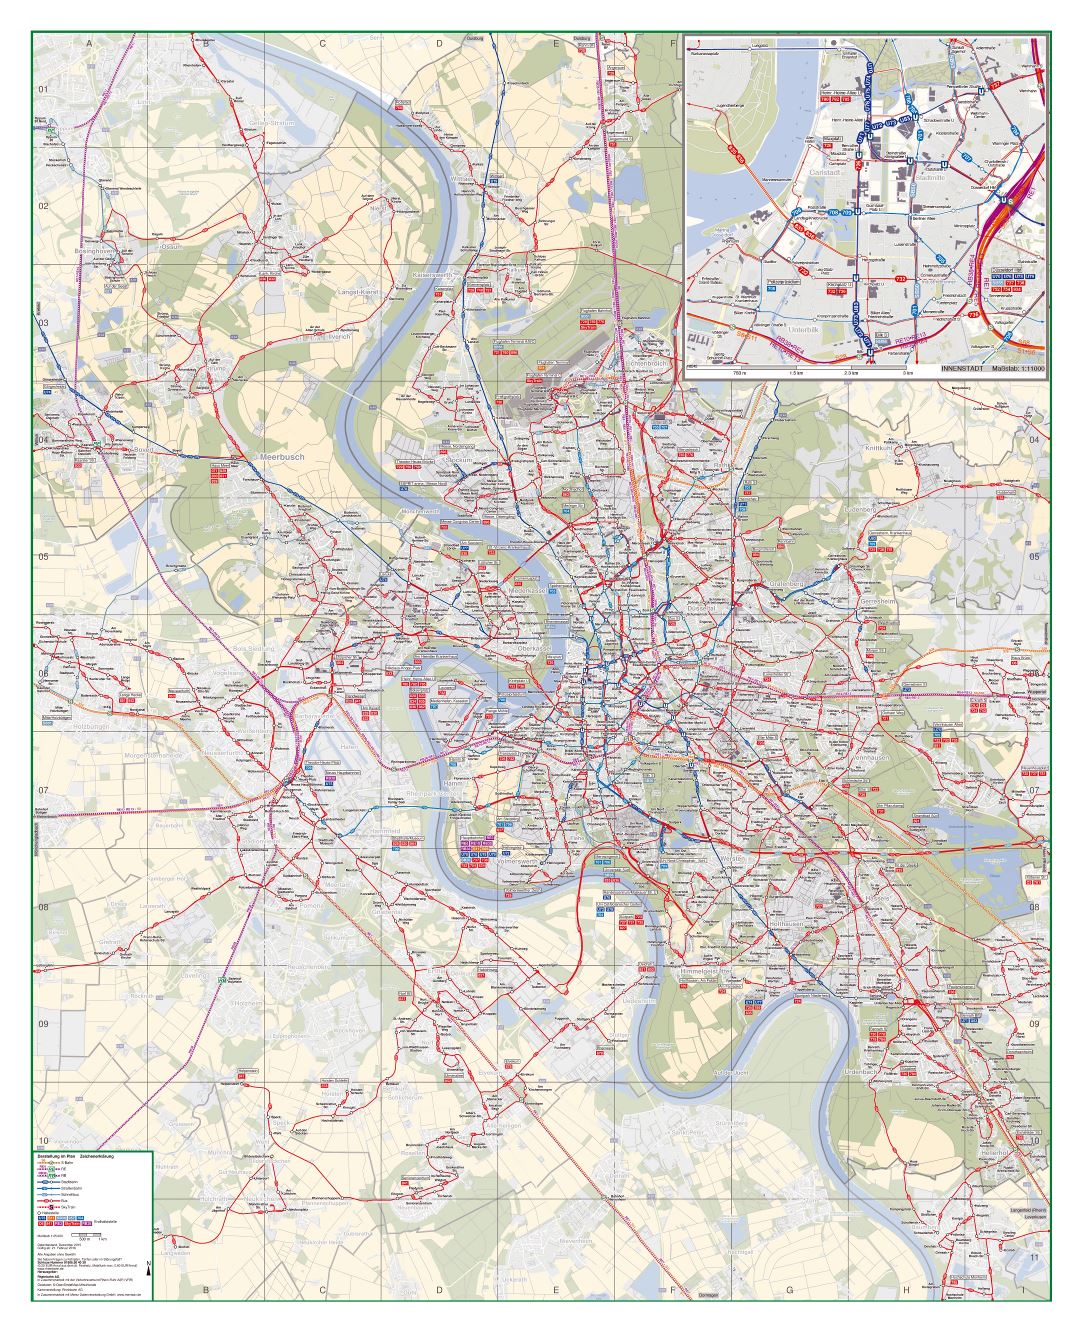 Large scale transport map of Dusseldorf city